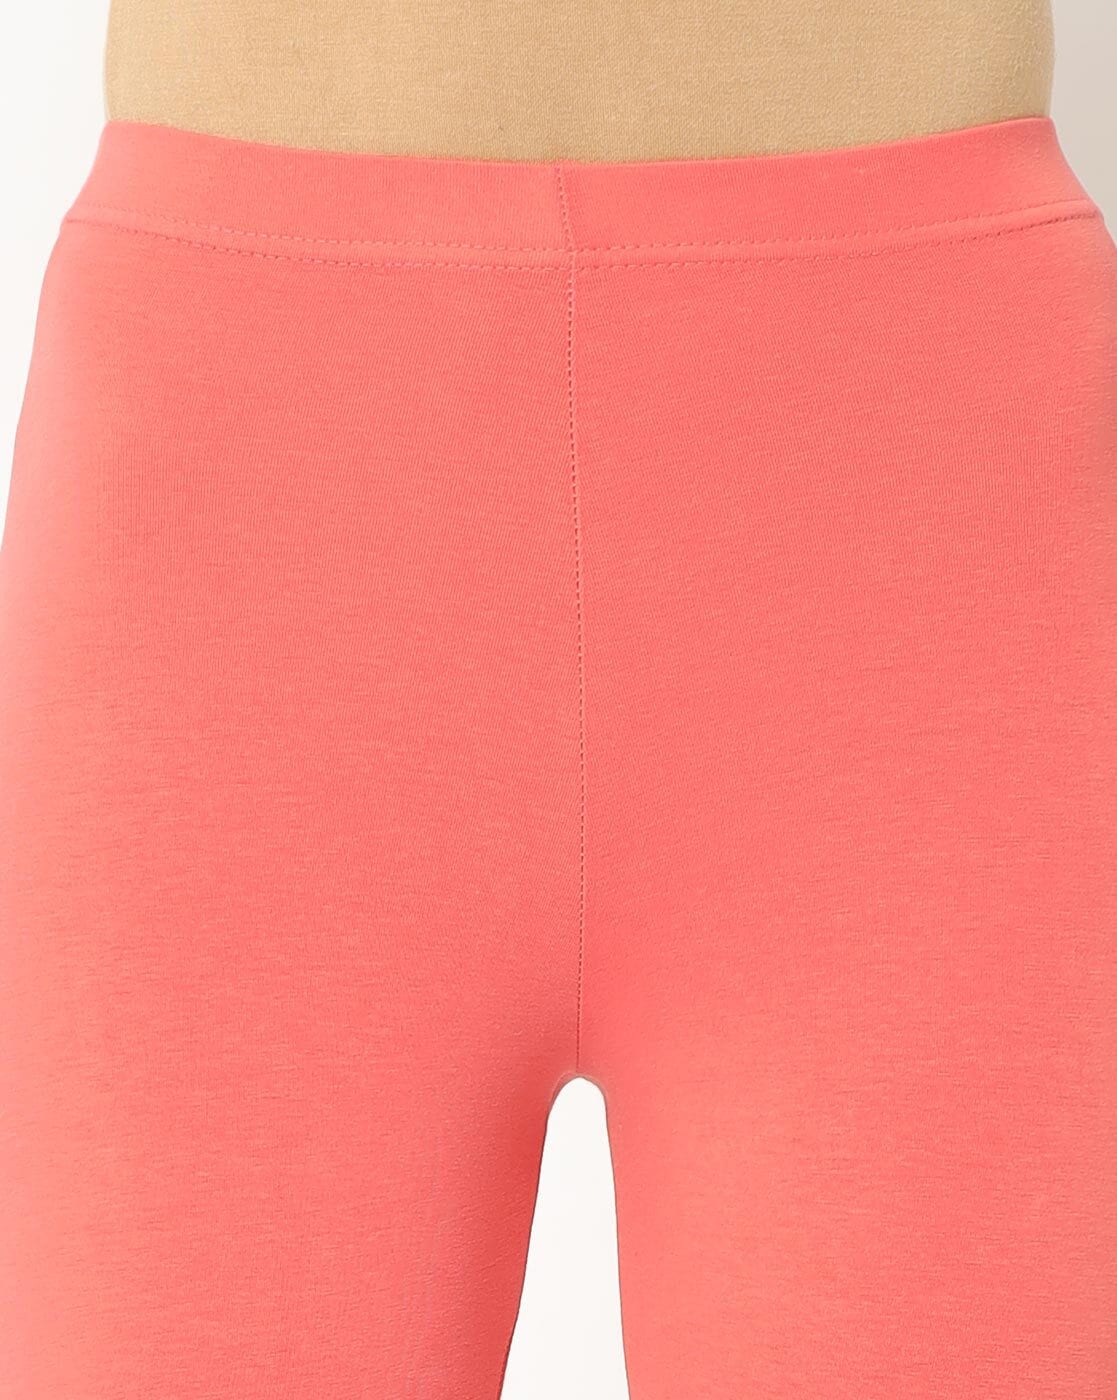 Buy Pink Leggings for Women by GO COLORS Online